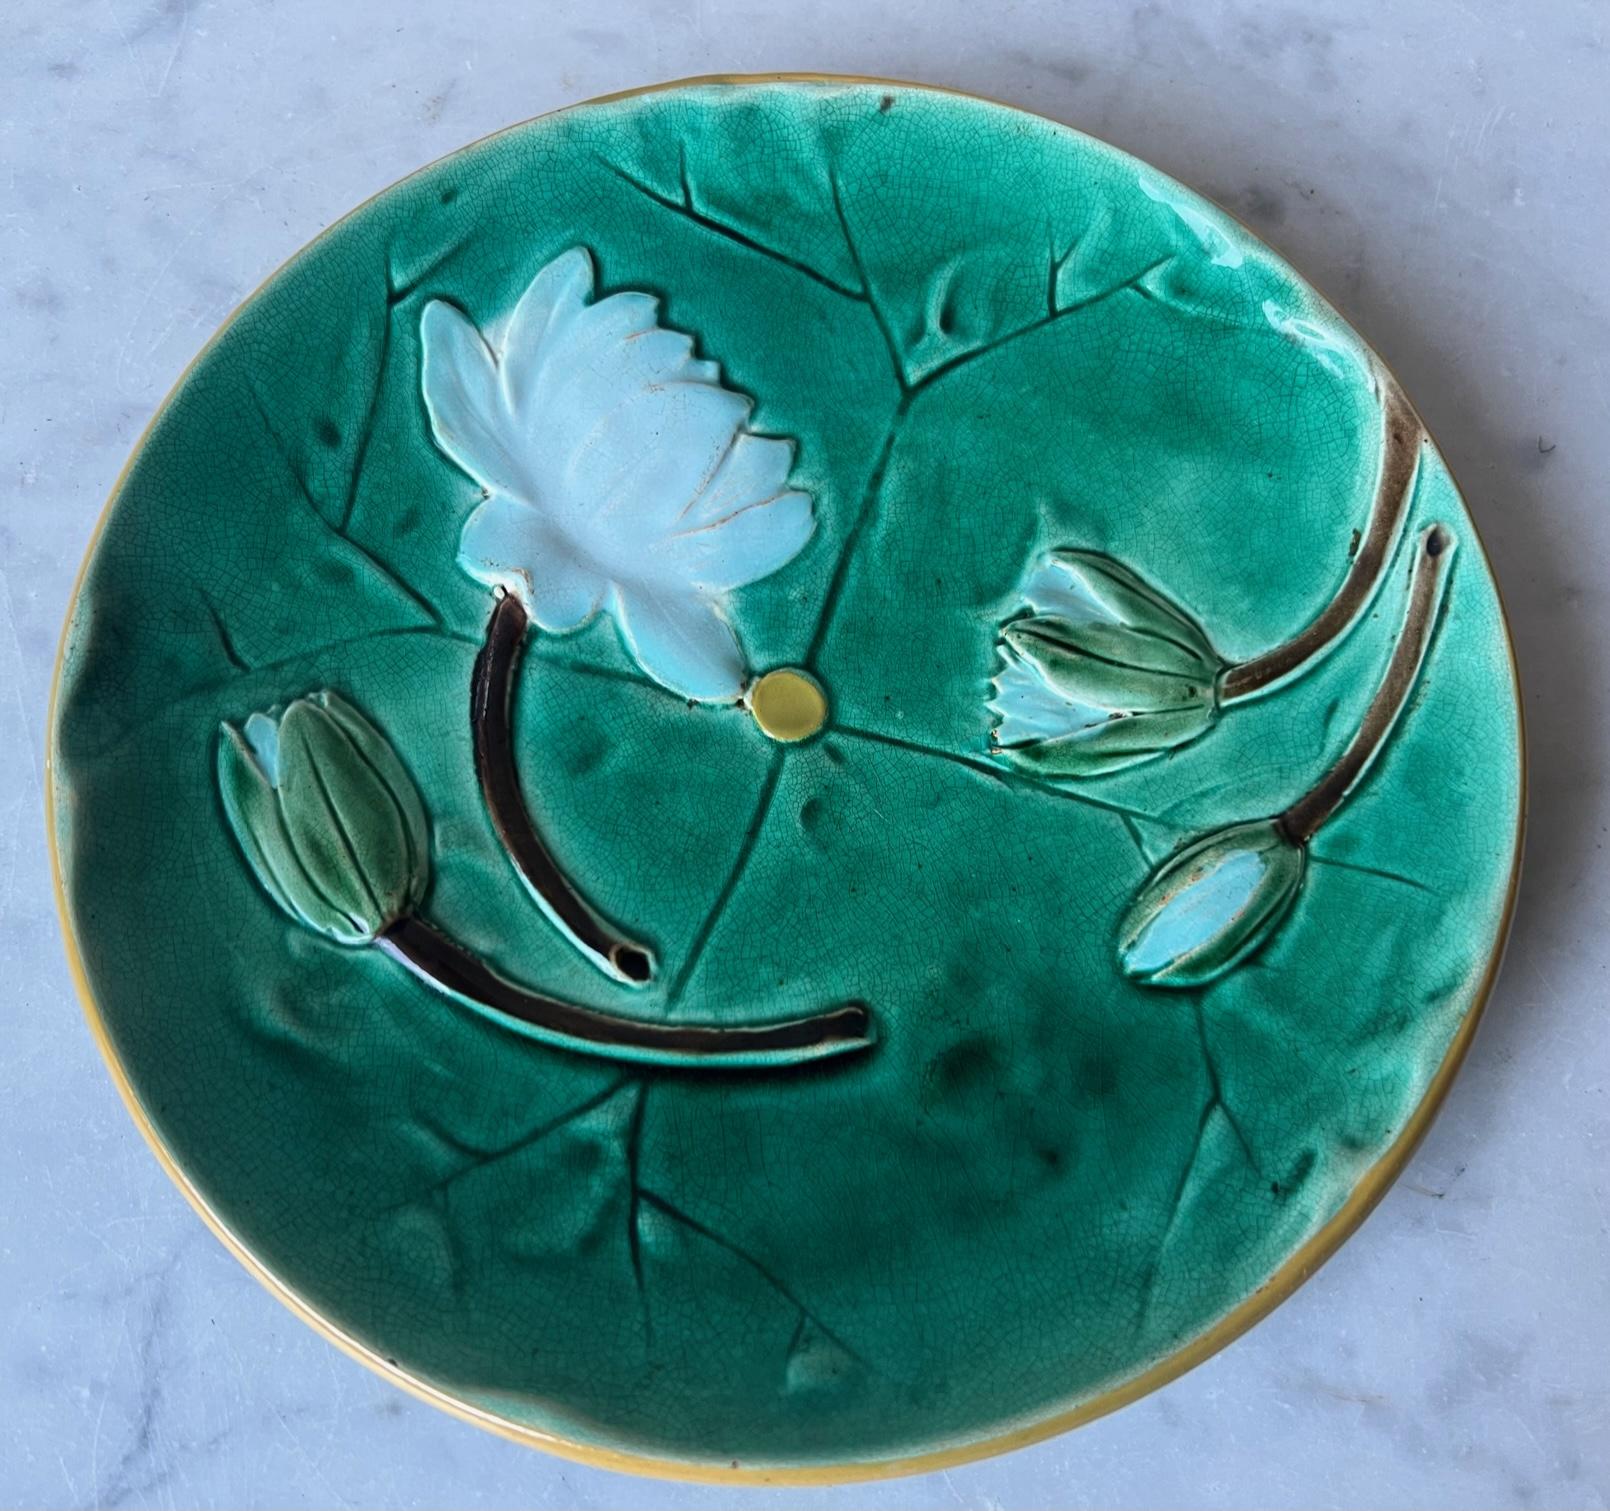 Joseph Holdcraft Majolica Pond Lily Plate, C. 1885 In Good Condition For Sale In Ross, CA